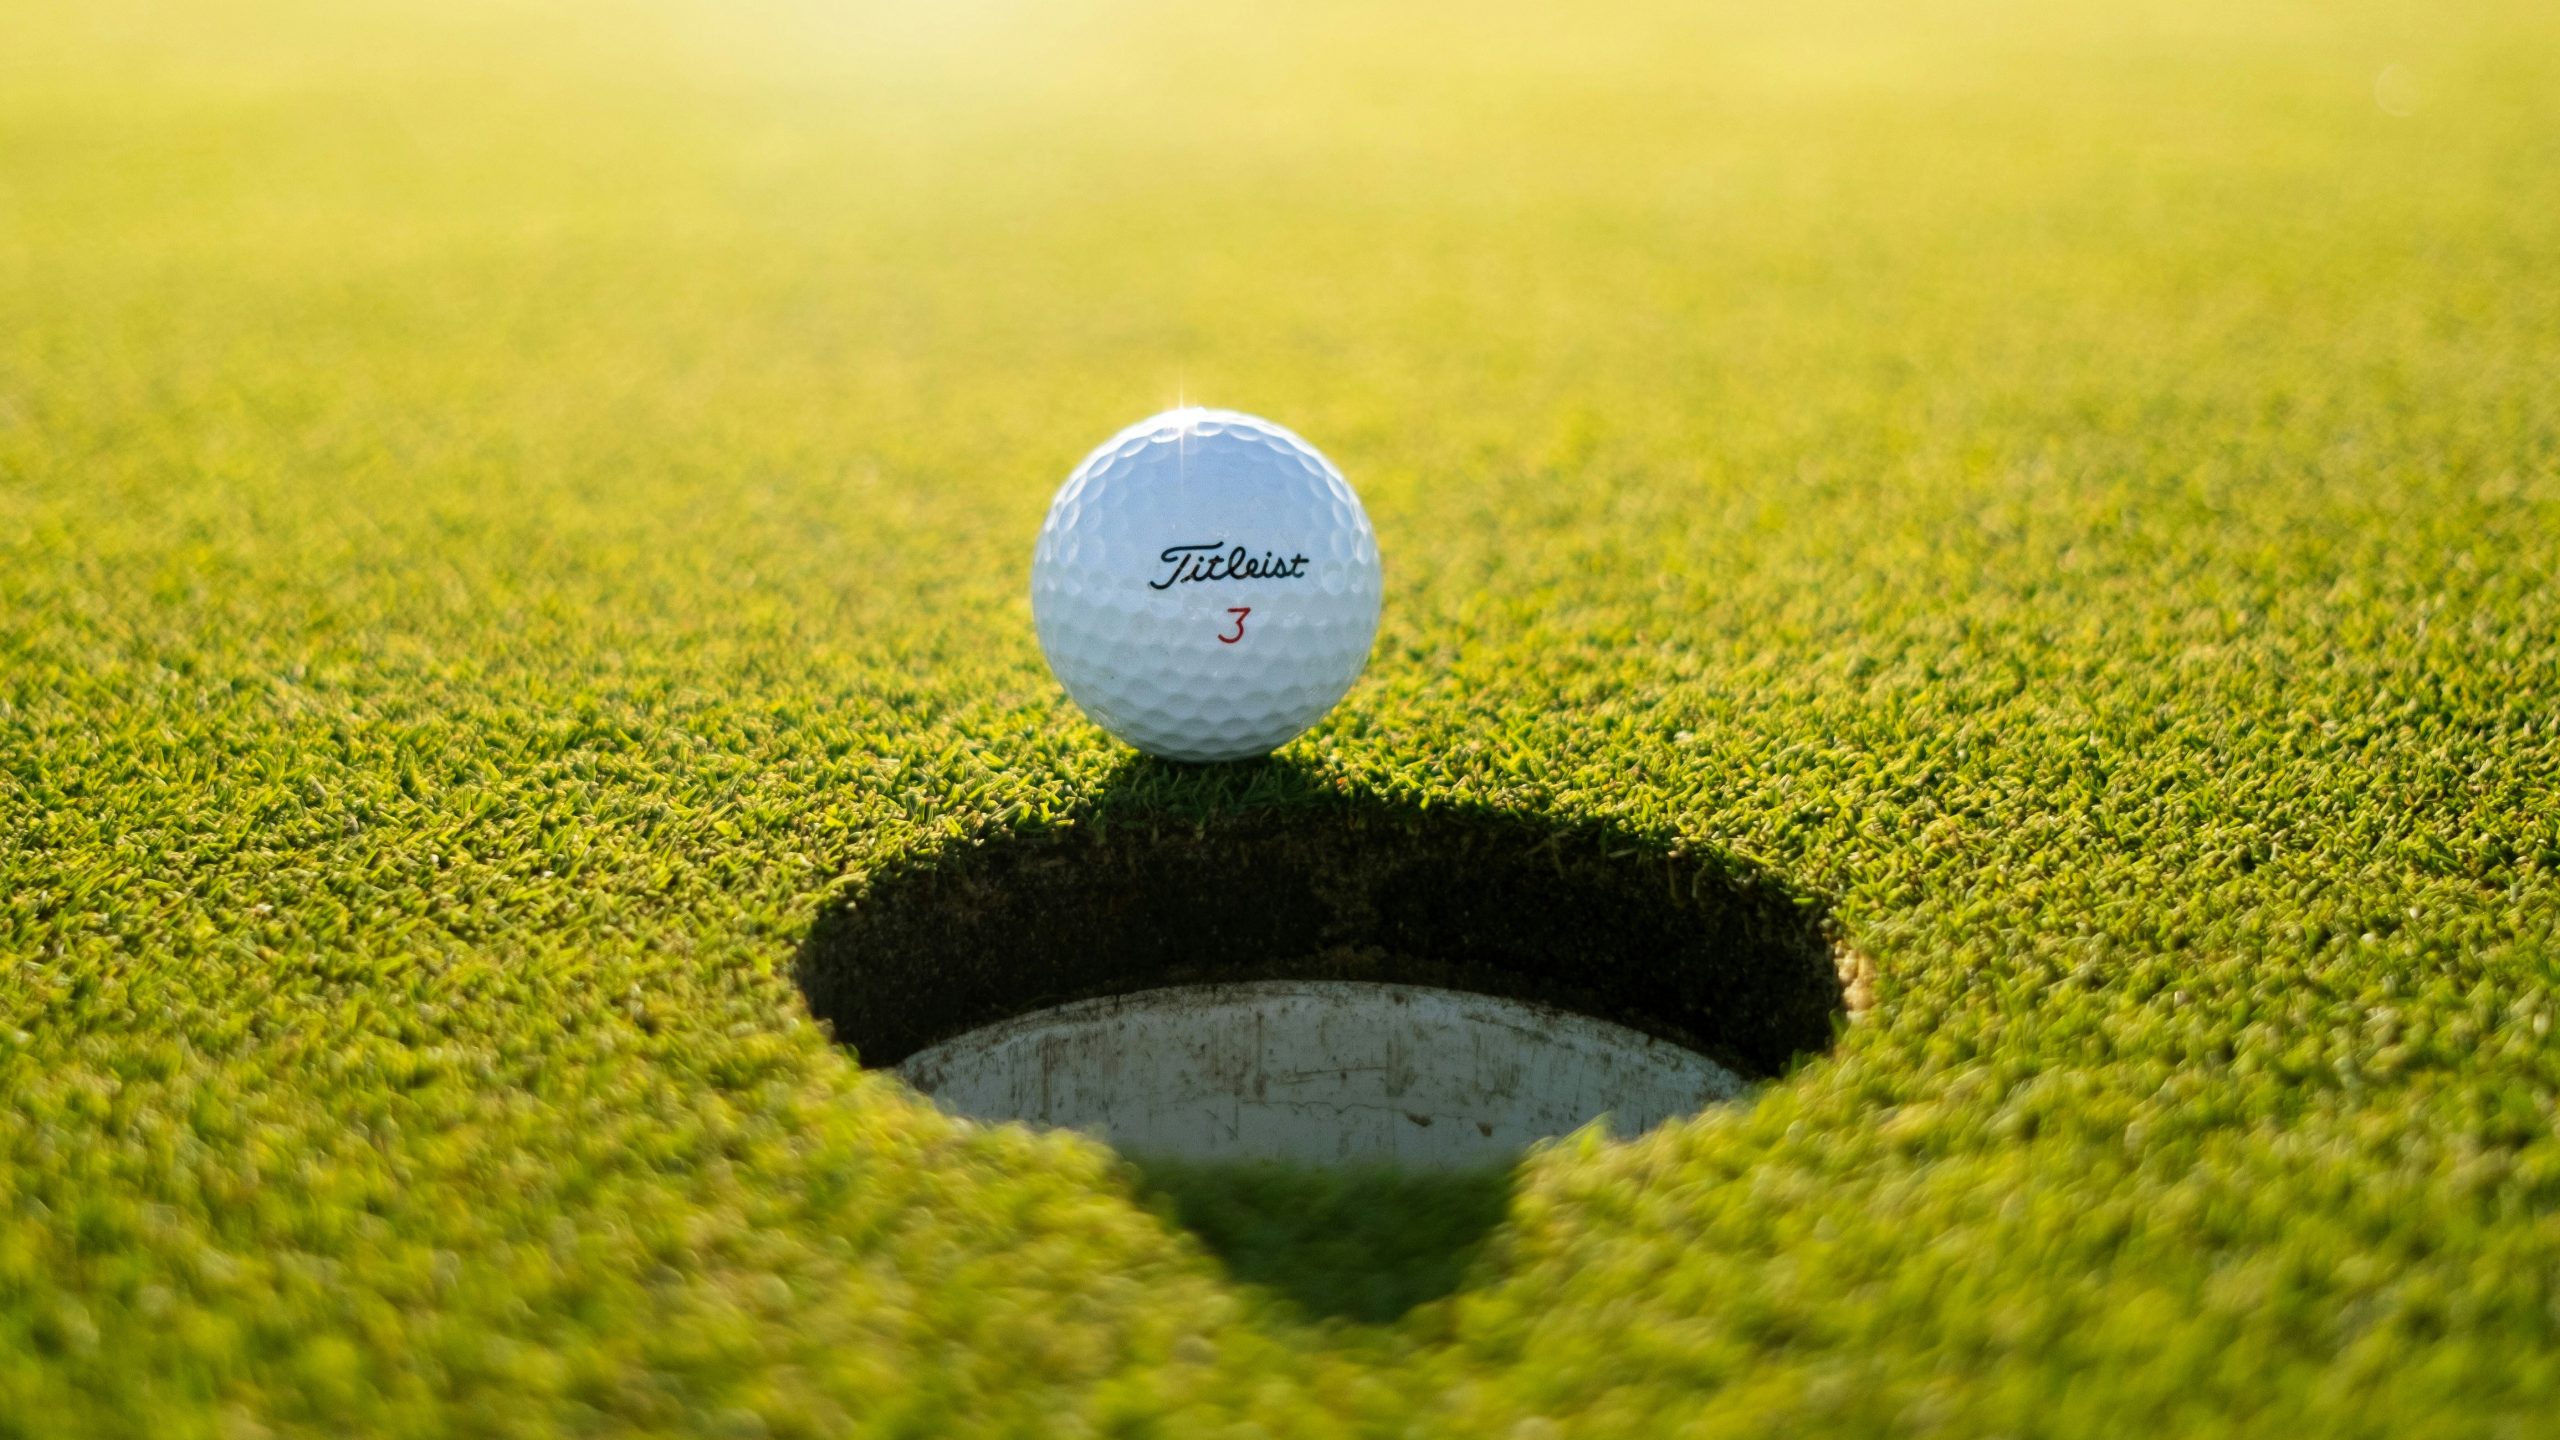 A Titleist 3 golf ball balances precariously on the lip of a hole during an Invitational game, bathed by shimmering sunlight on a verdant, well-manicured golf turf.